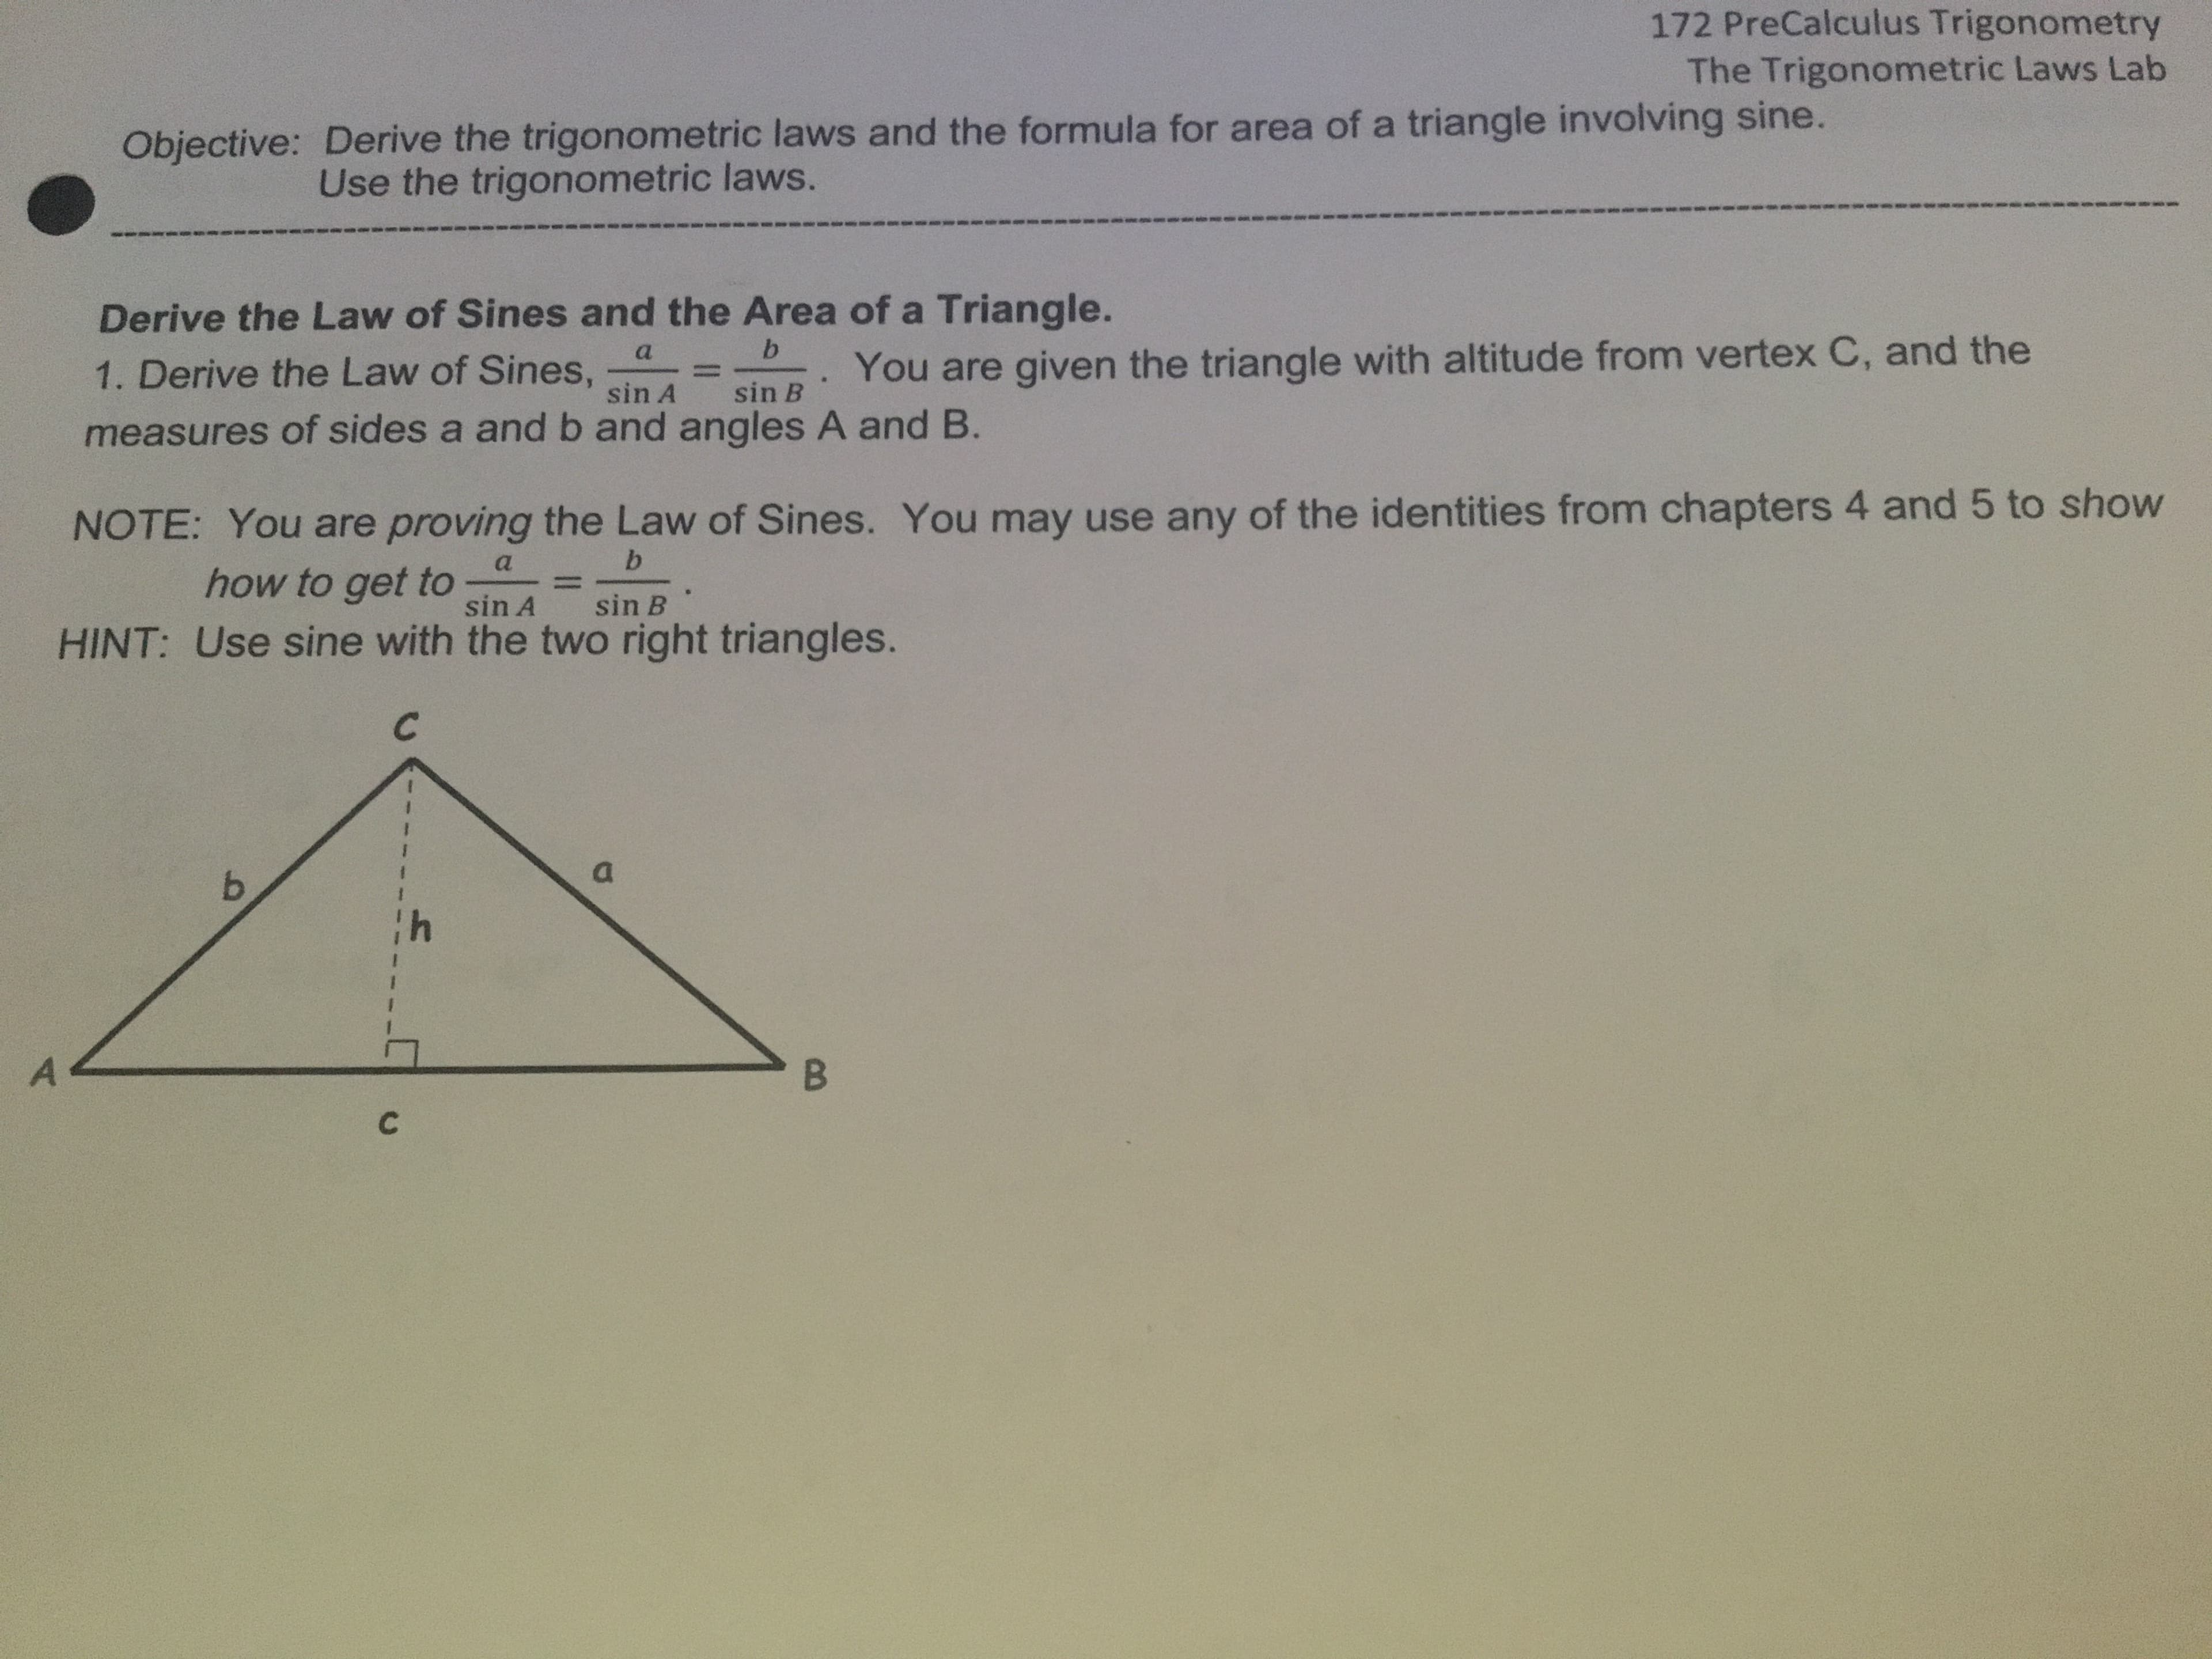 172 PreCalculus Trigonometry
The Trigonometric Laws Lab
Objective: Derive the trigonometric laws and the formula for area of a triangle involving sine.
Use the trigonometric laws.
Derive the Law of Sines and the Area of a Triangle.
a
1. Derive the Law of Sines,
sin A
You are given the triangle with altitude from vertex C, and the
%3D
sin B
measures of sides a and b and angles A and B.
NOTE: You are proving the Law of Sines. You may use any of the identities from chapters 4 and 5 to show
b.
how to get to
sin A
sin B
HINT: Use sine with the two right triangles.
b.
B.
